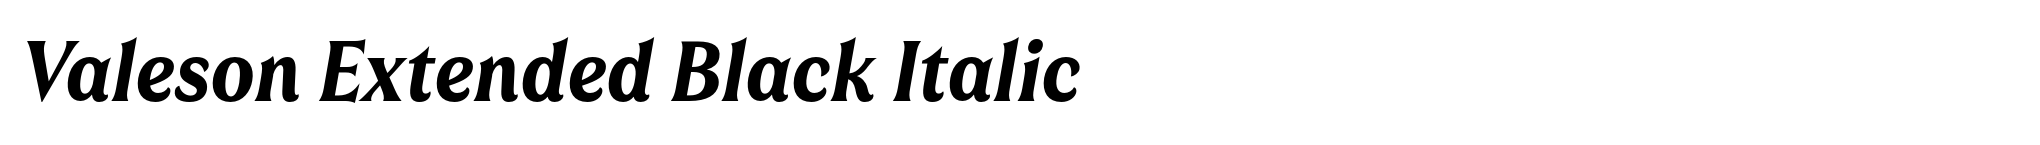 Valeson Extended Black Italic image